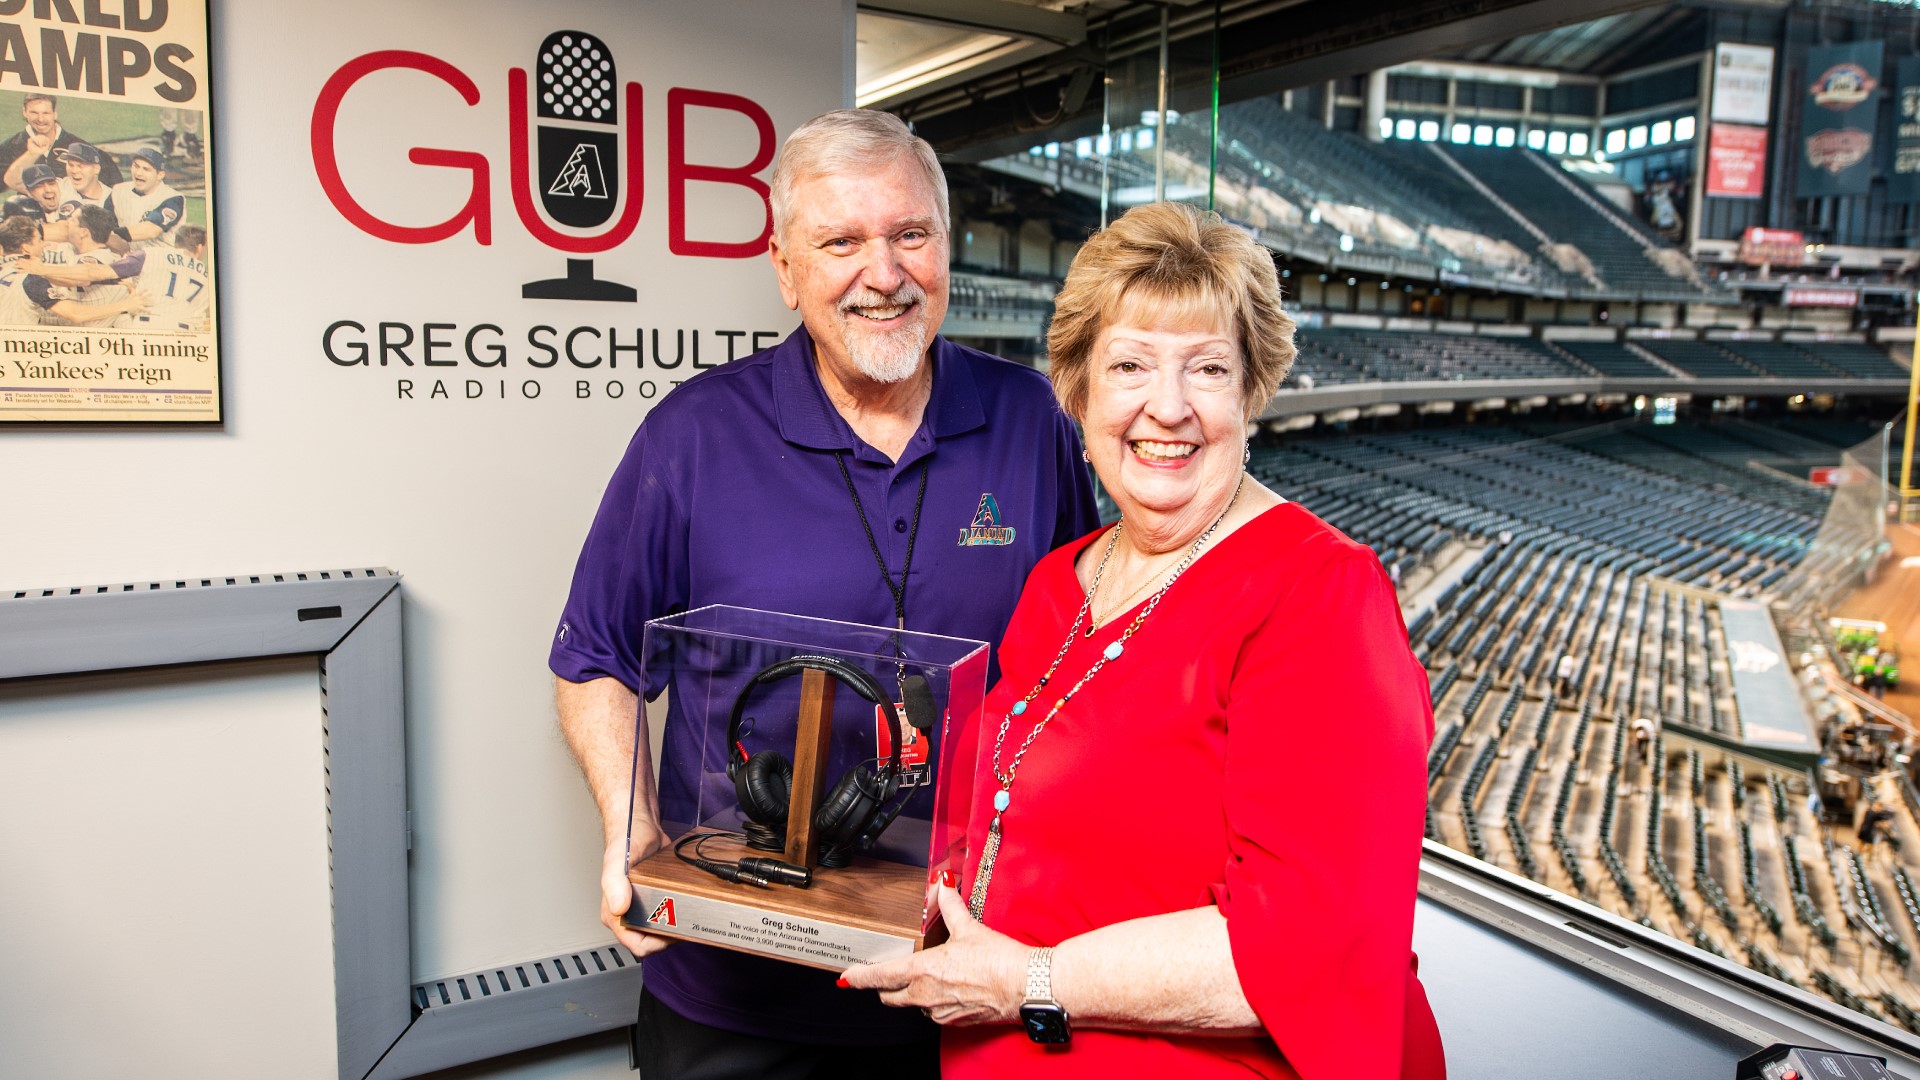 Longtime D-Backs broadcaster Greg Schulte will retire at the end of the season, but before that happens, 12Sports spoke with Schulte about his time on the mic